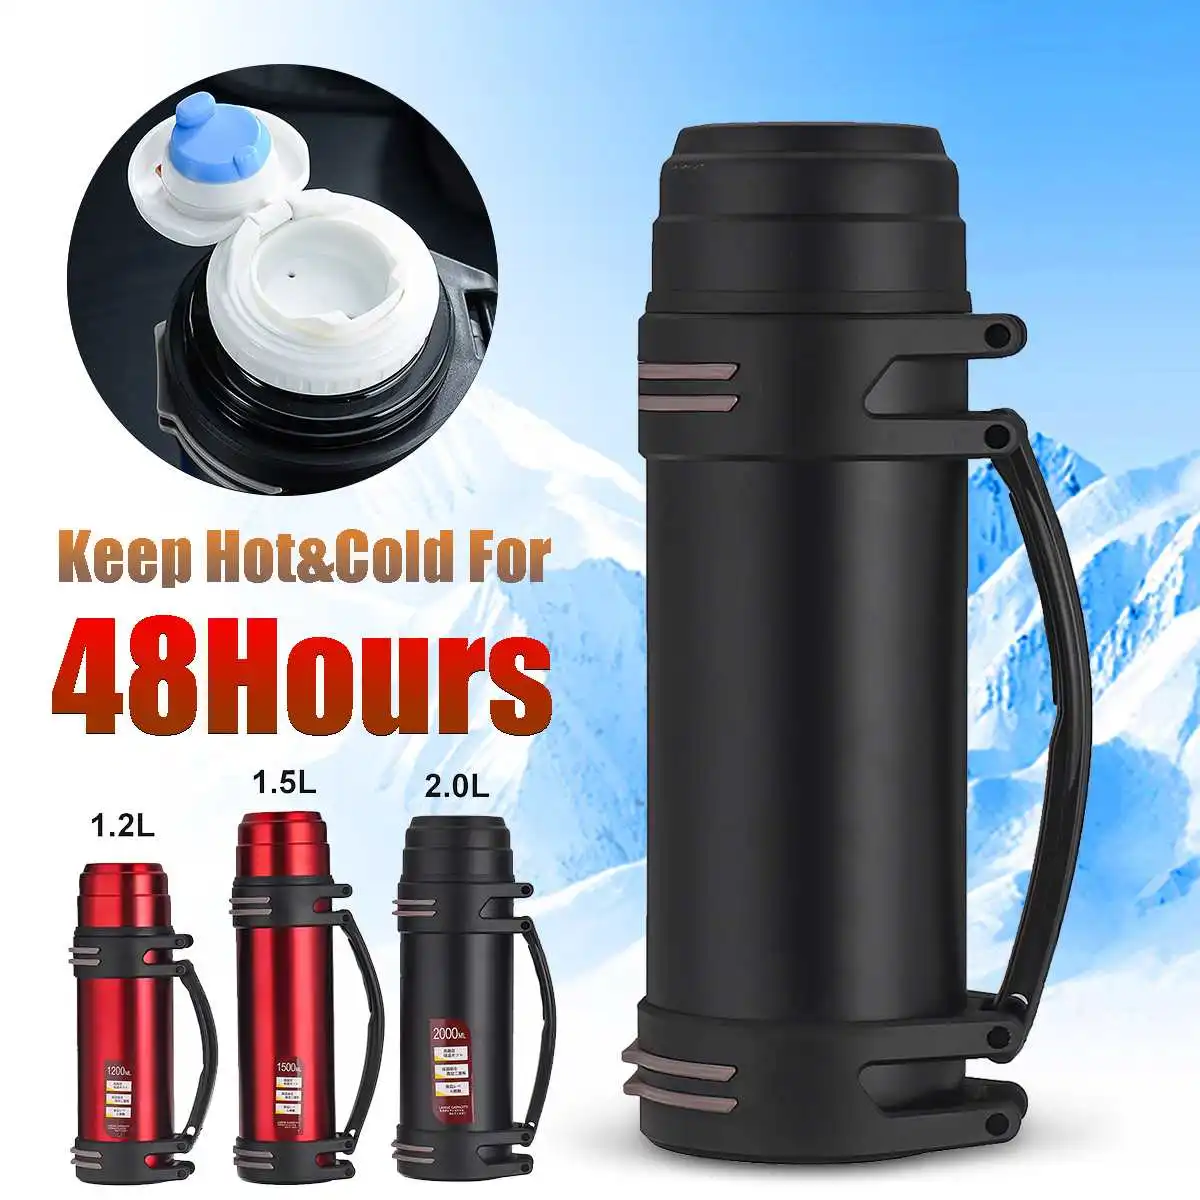 1.2-2L Stainless Steel Insulated Thermos Cup Water Mug Vacuum Flask Drink Bottle 